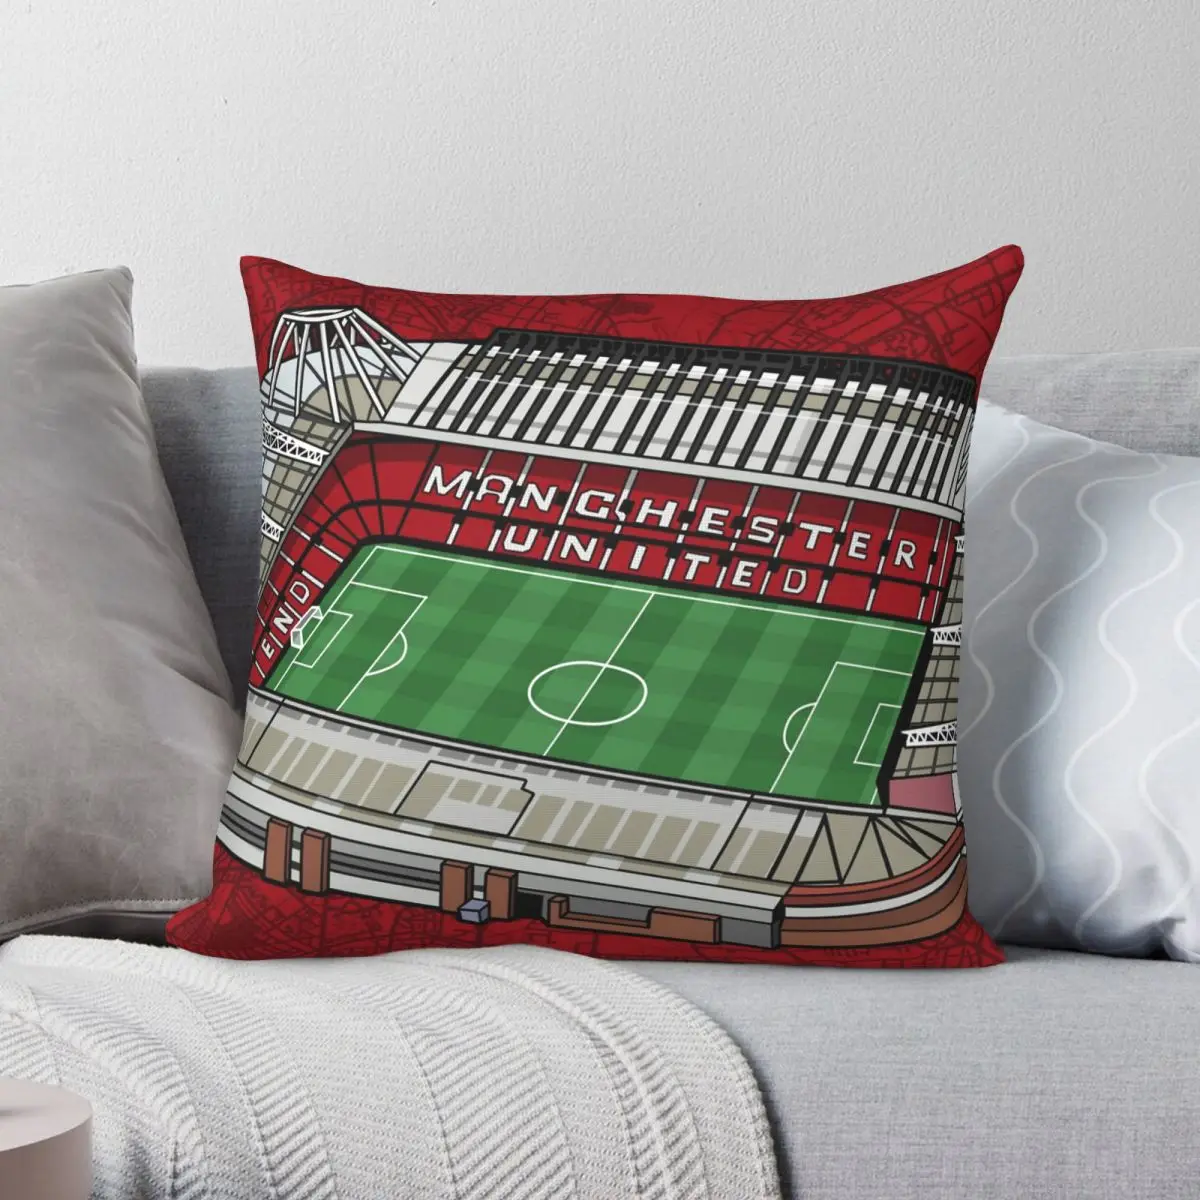 Old Trafford Manchester United Square Pillowcase Polyester Linen Velvet Pattern Decorative Pillow Case Car Cushion Cover 45x45